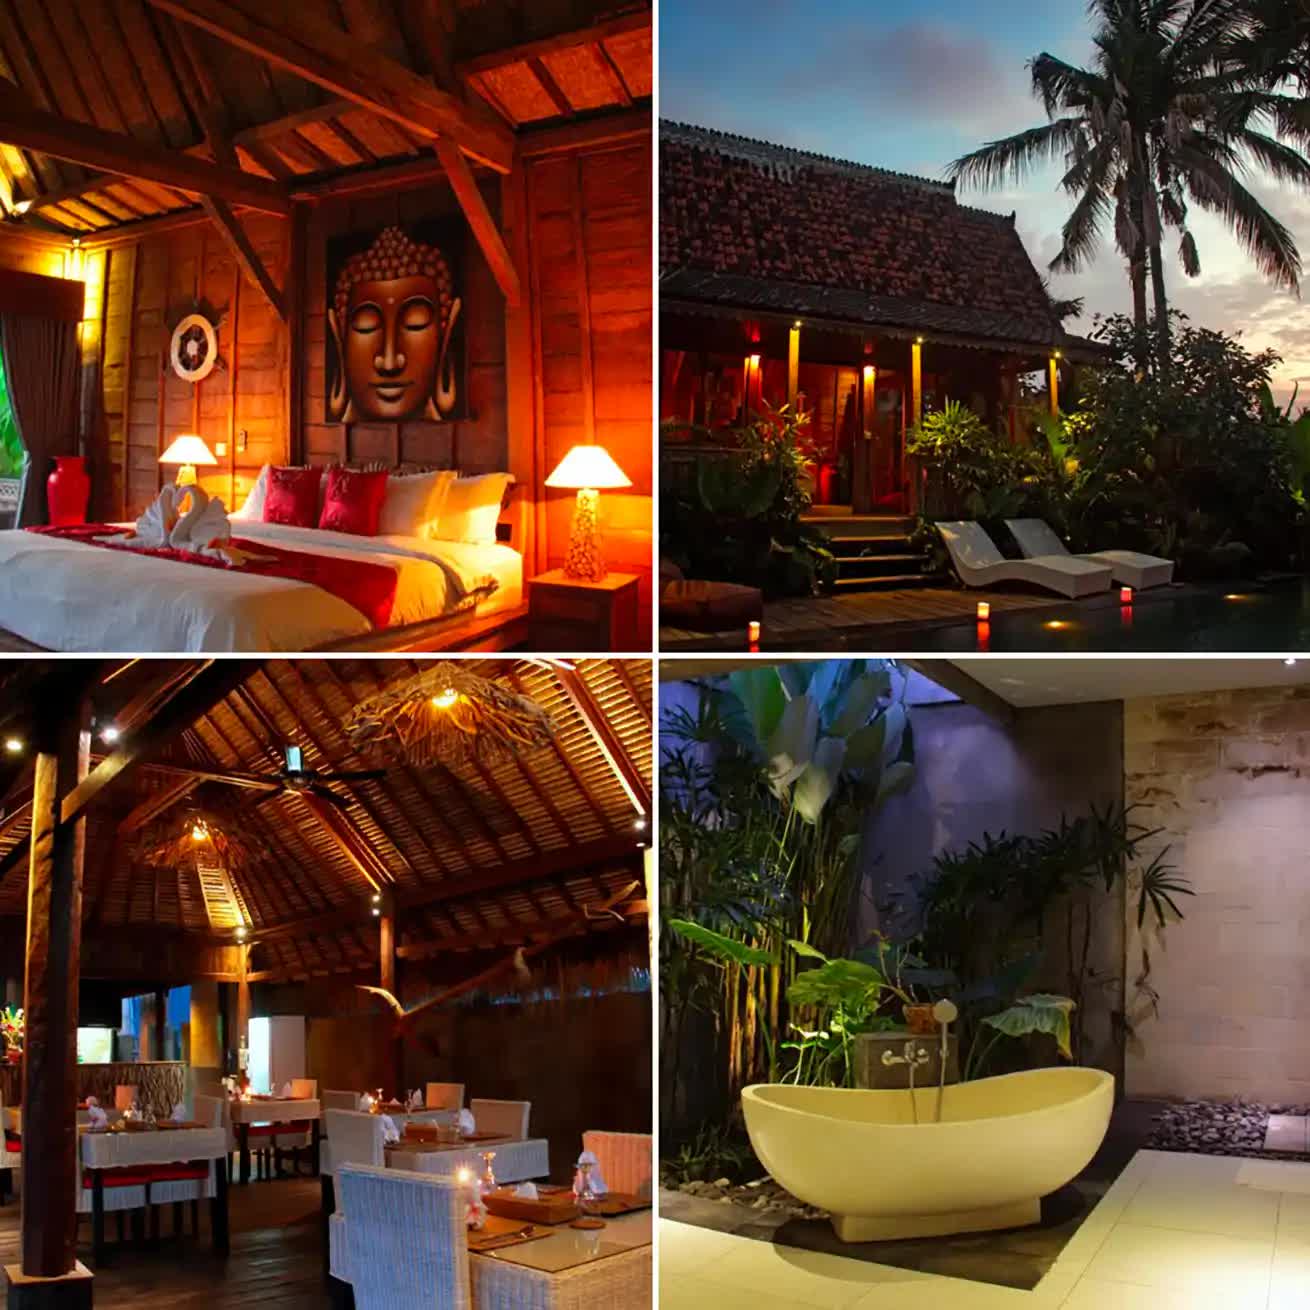 Ubud Virgin Villa accomodation with all the types of rooms - from bedroom to bathroom. 